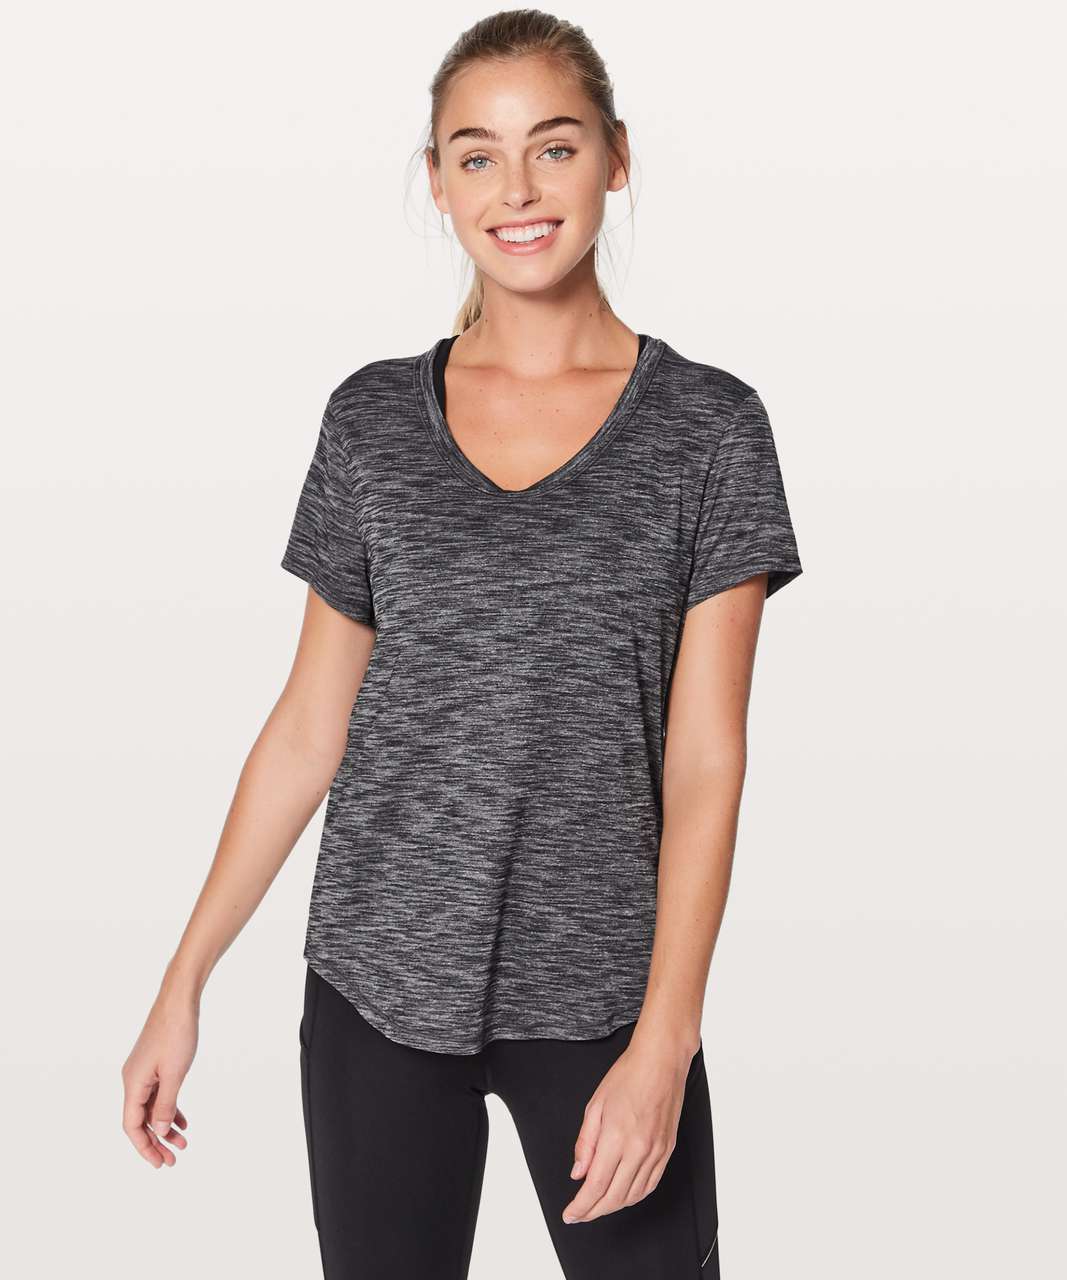 lululemon athletica, Tops, Lululemon Meant To Move Womens Long Sleeve  Activewear Top